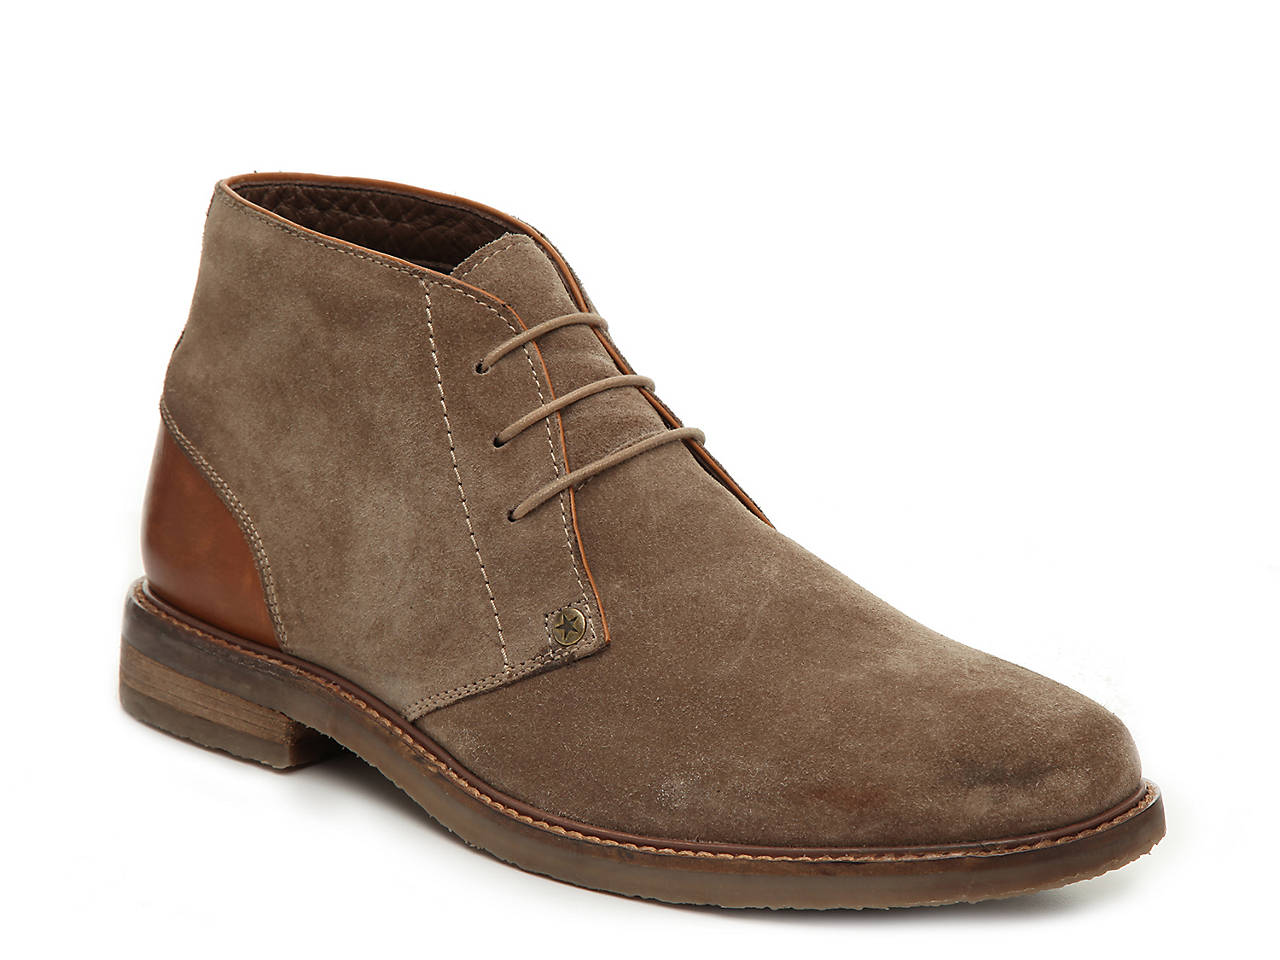 Rustic Asphalt Ask For More Suede Chukka Boot Men's Shoes | DSW